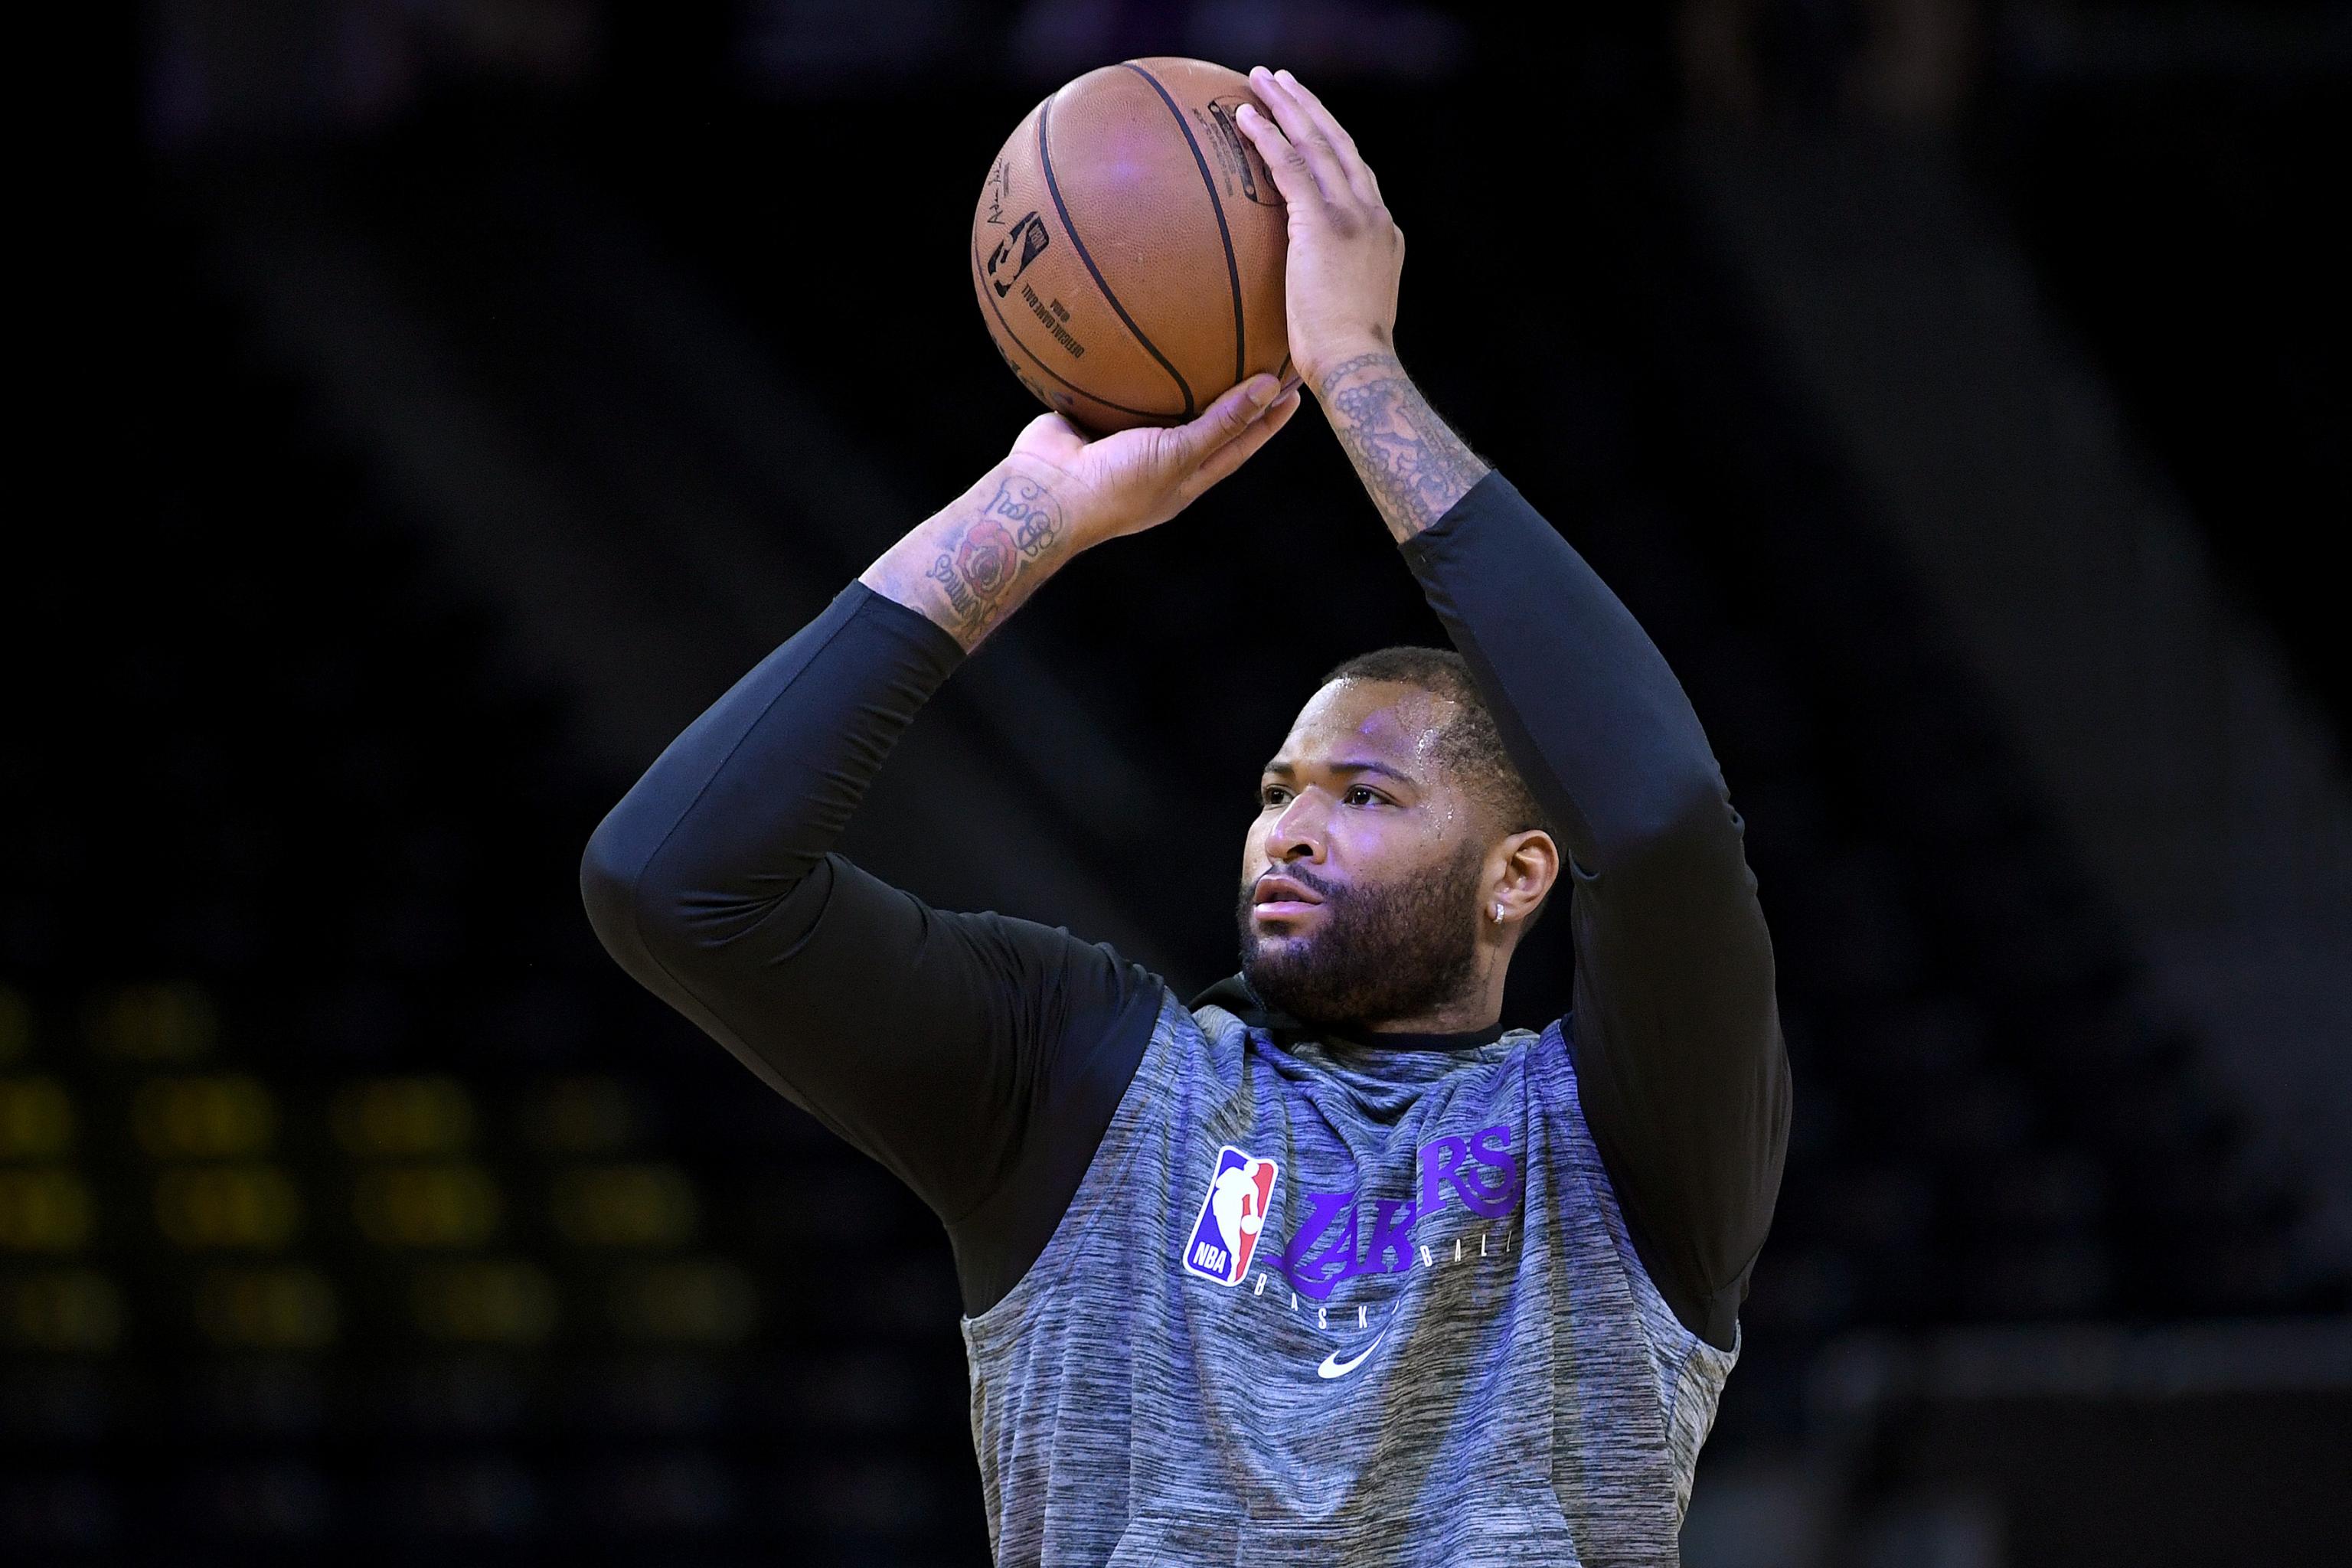 DeMarcus Cousins waived by Lakers